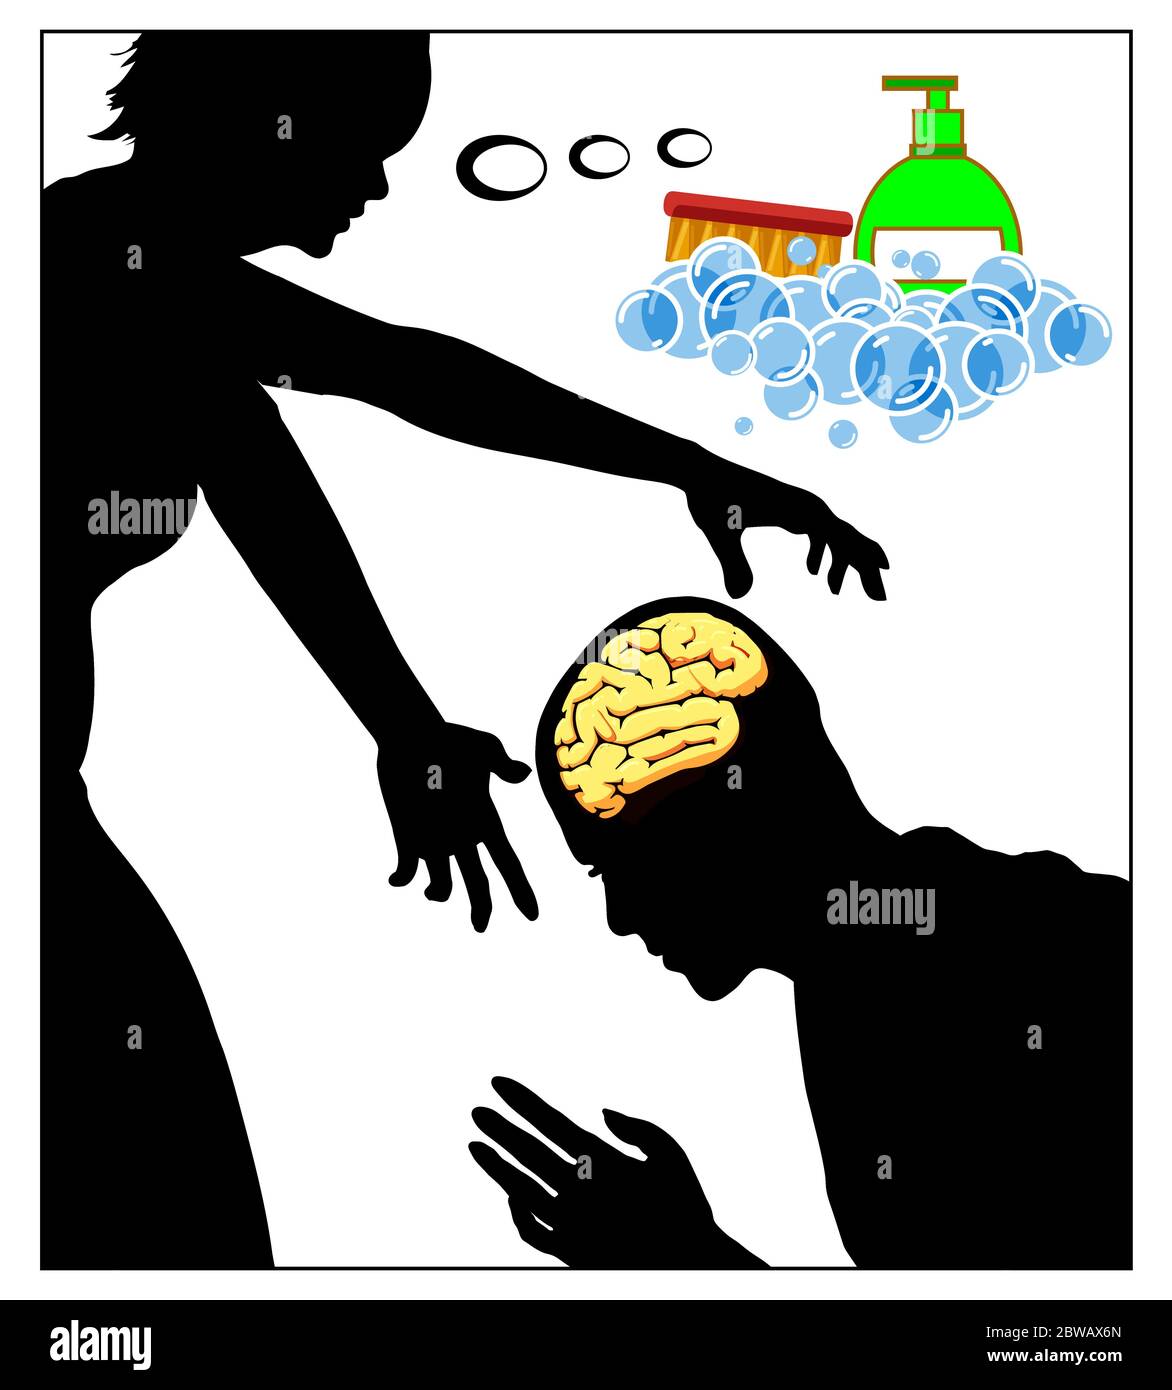 Caricature of mind control in abusive relationship between two people. Stock Photo